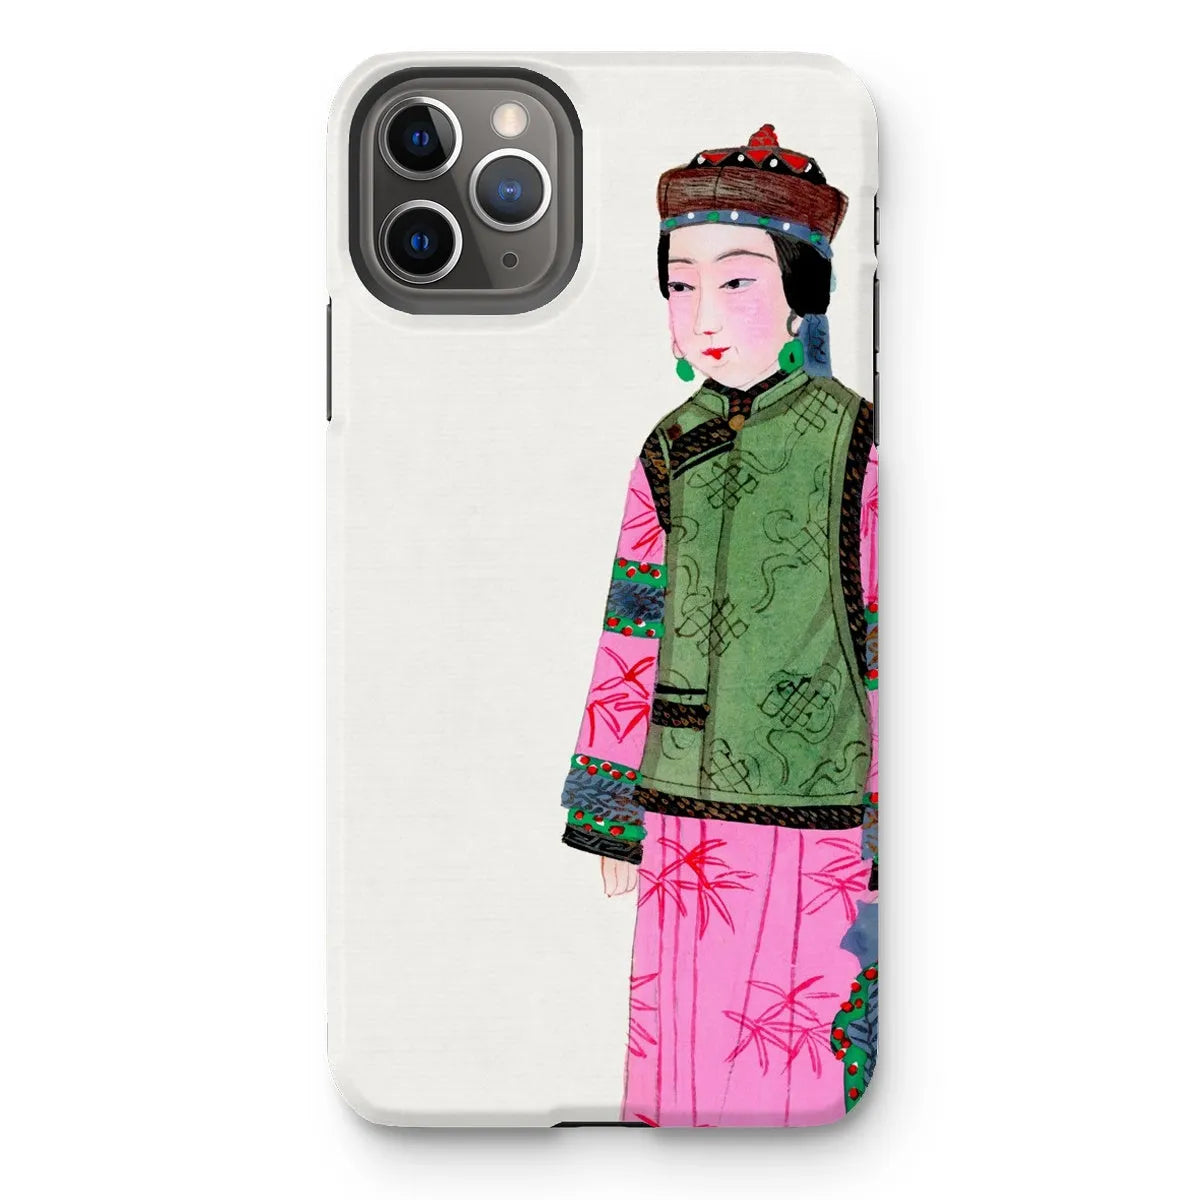 Noblewoman In Winter - Chinese Aesthetic Art Phone Case - Iphone 11 Pro Max / Matte - Mobile Phone Cases - Aesthetic Art